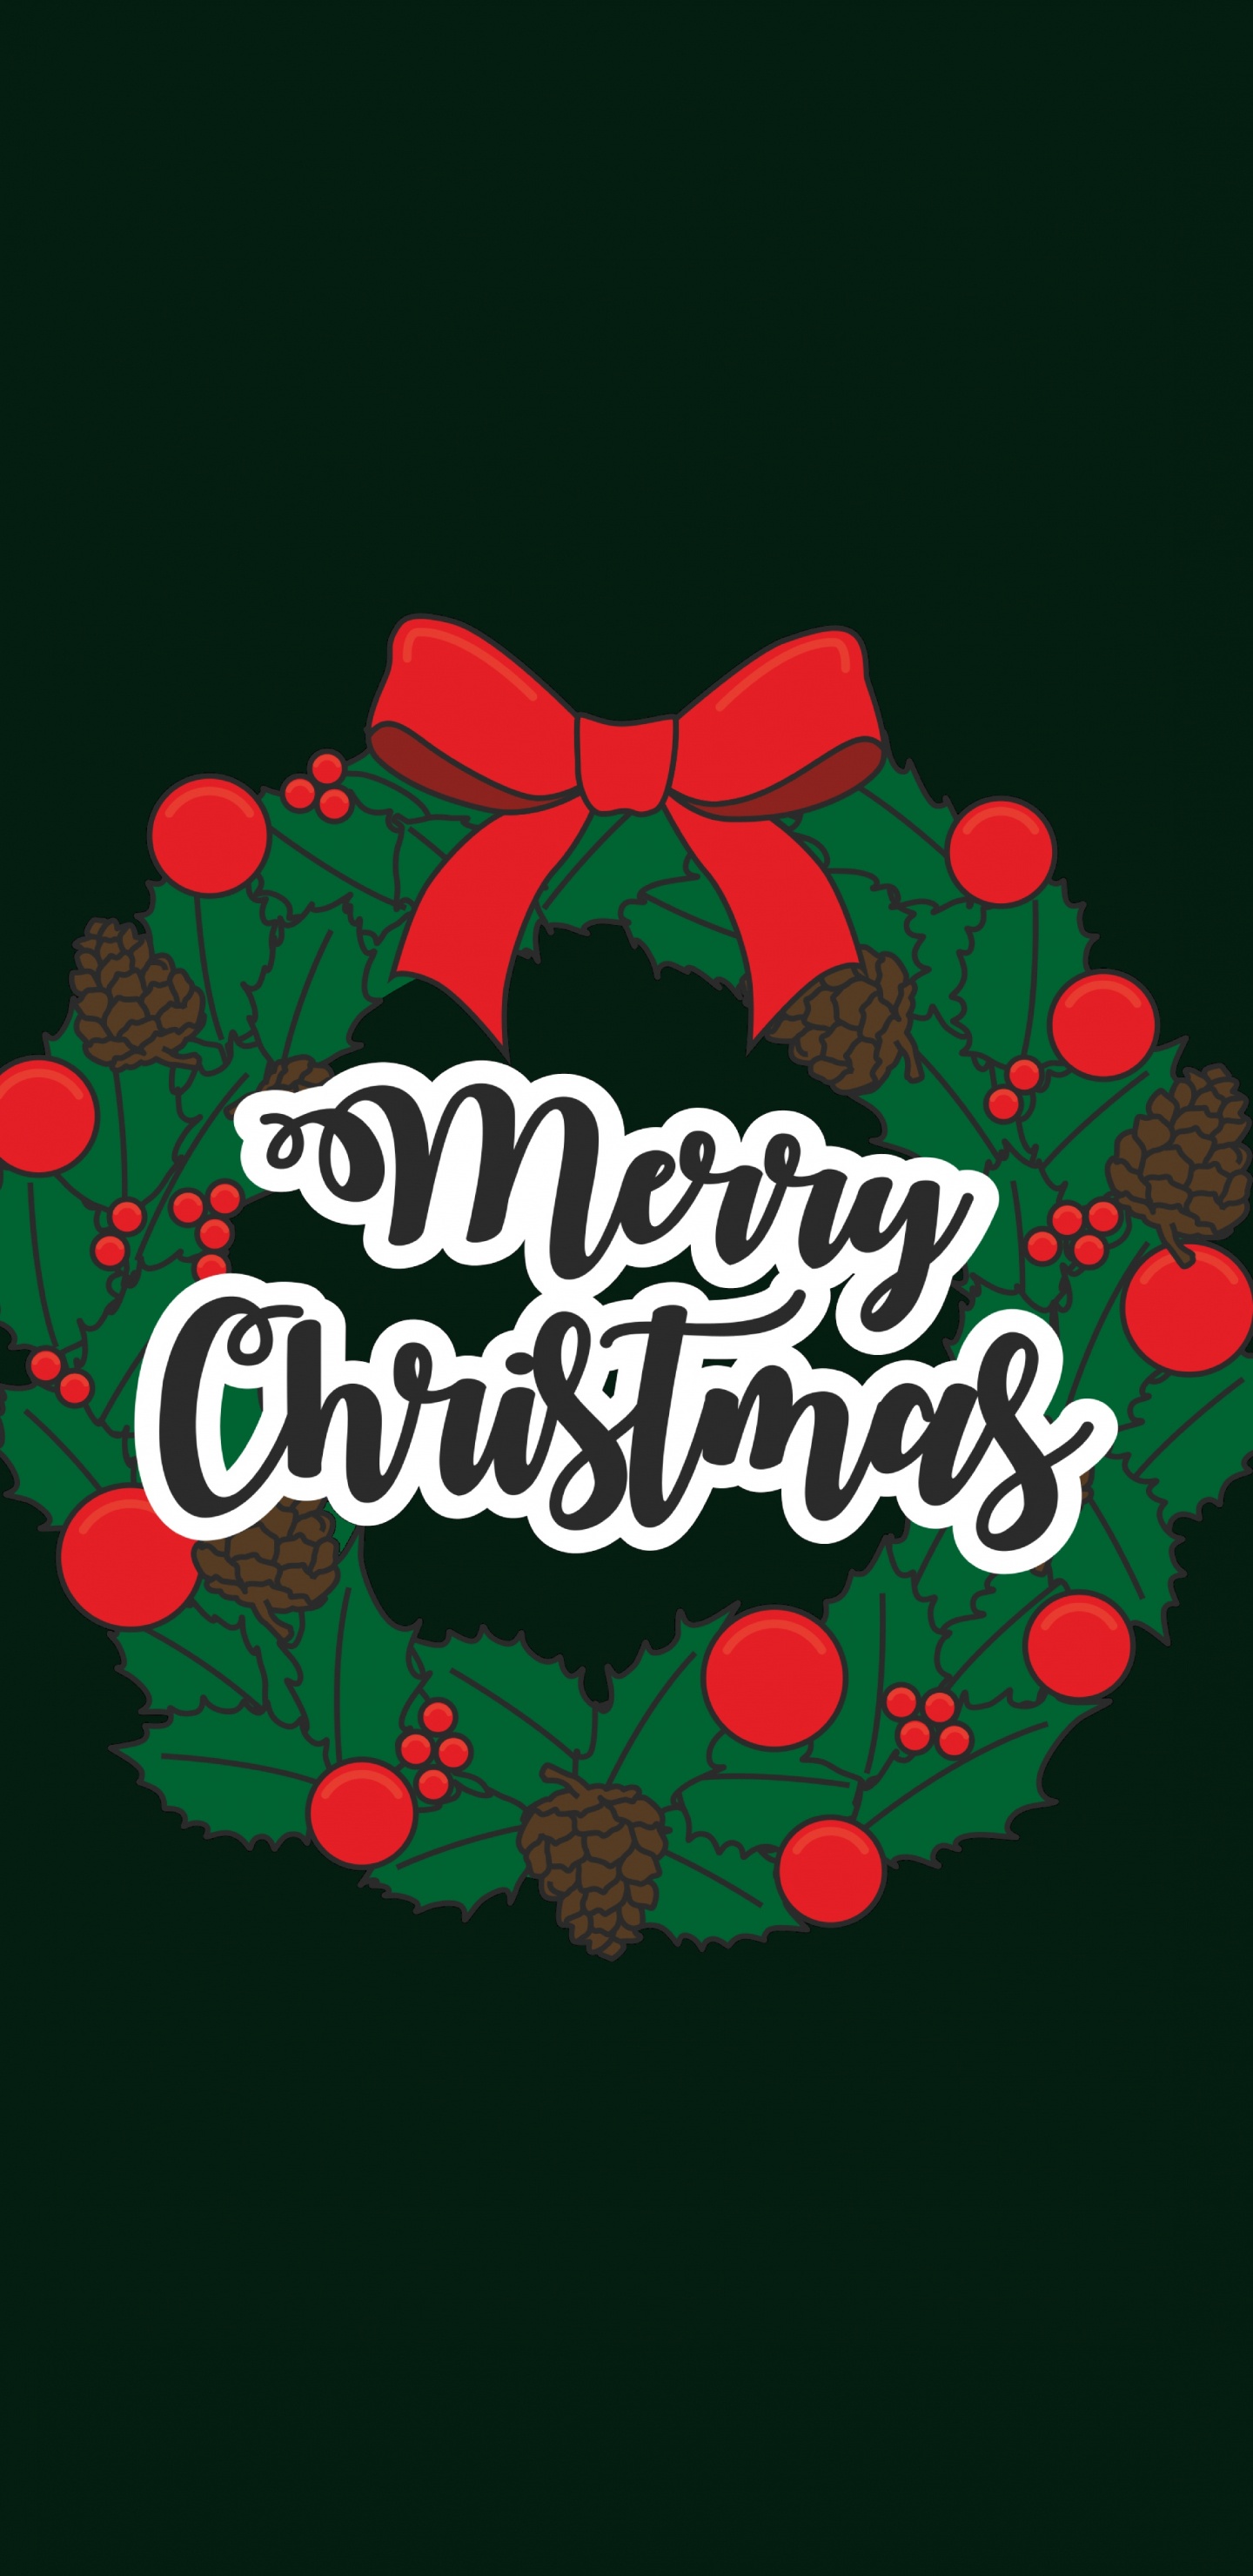 Christmas Day, Holiday, New Year, Logo, Illustration. Wallpaper in 1440x2960 Resolution